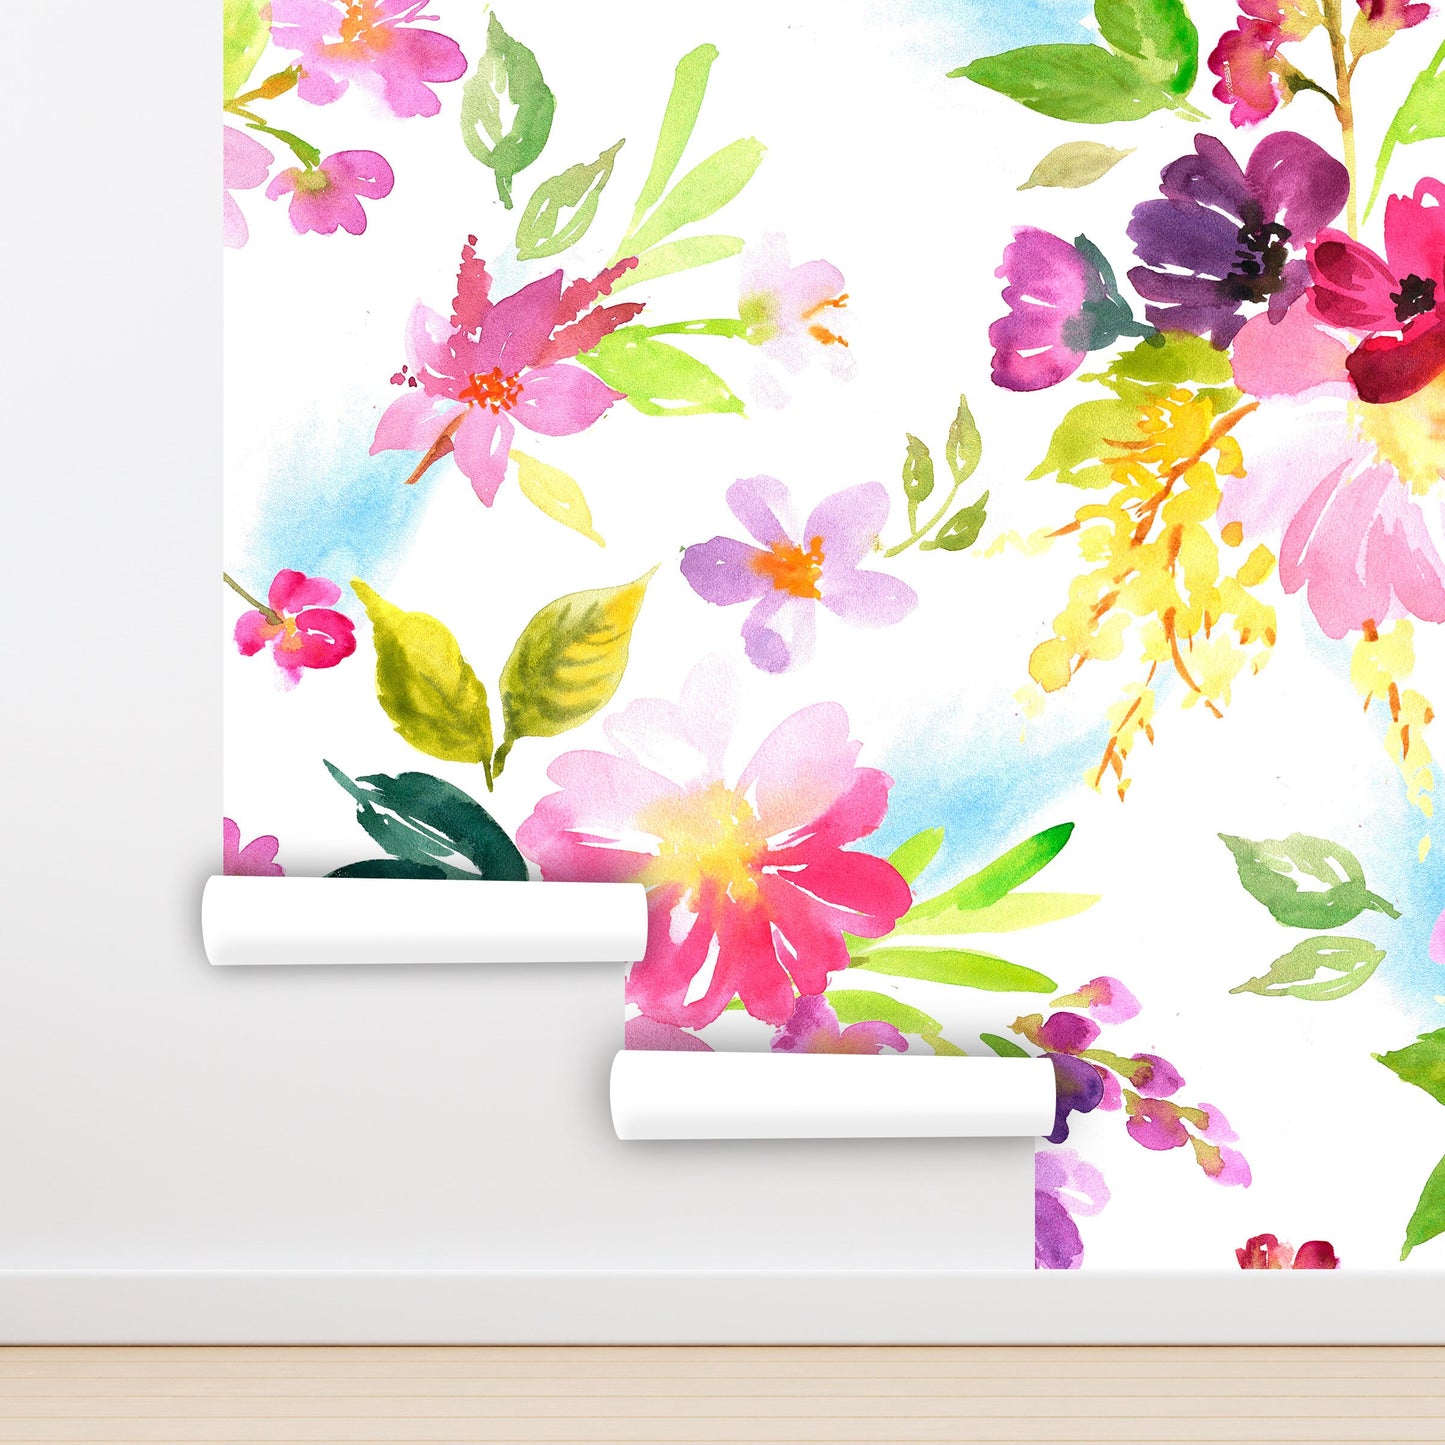 Watercolor Floral Wallpaper Peel and Stick, Big Flower Wallpaper, Removable Wall Paper